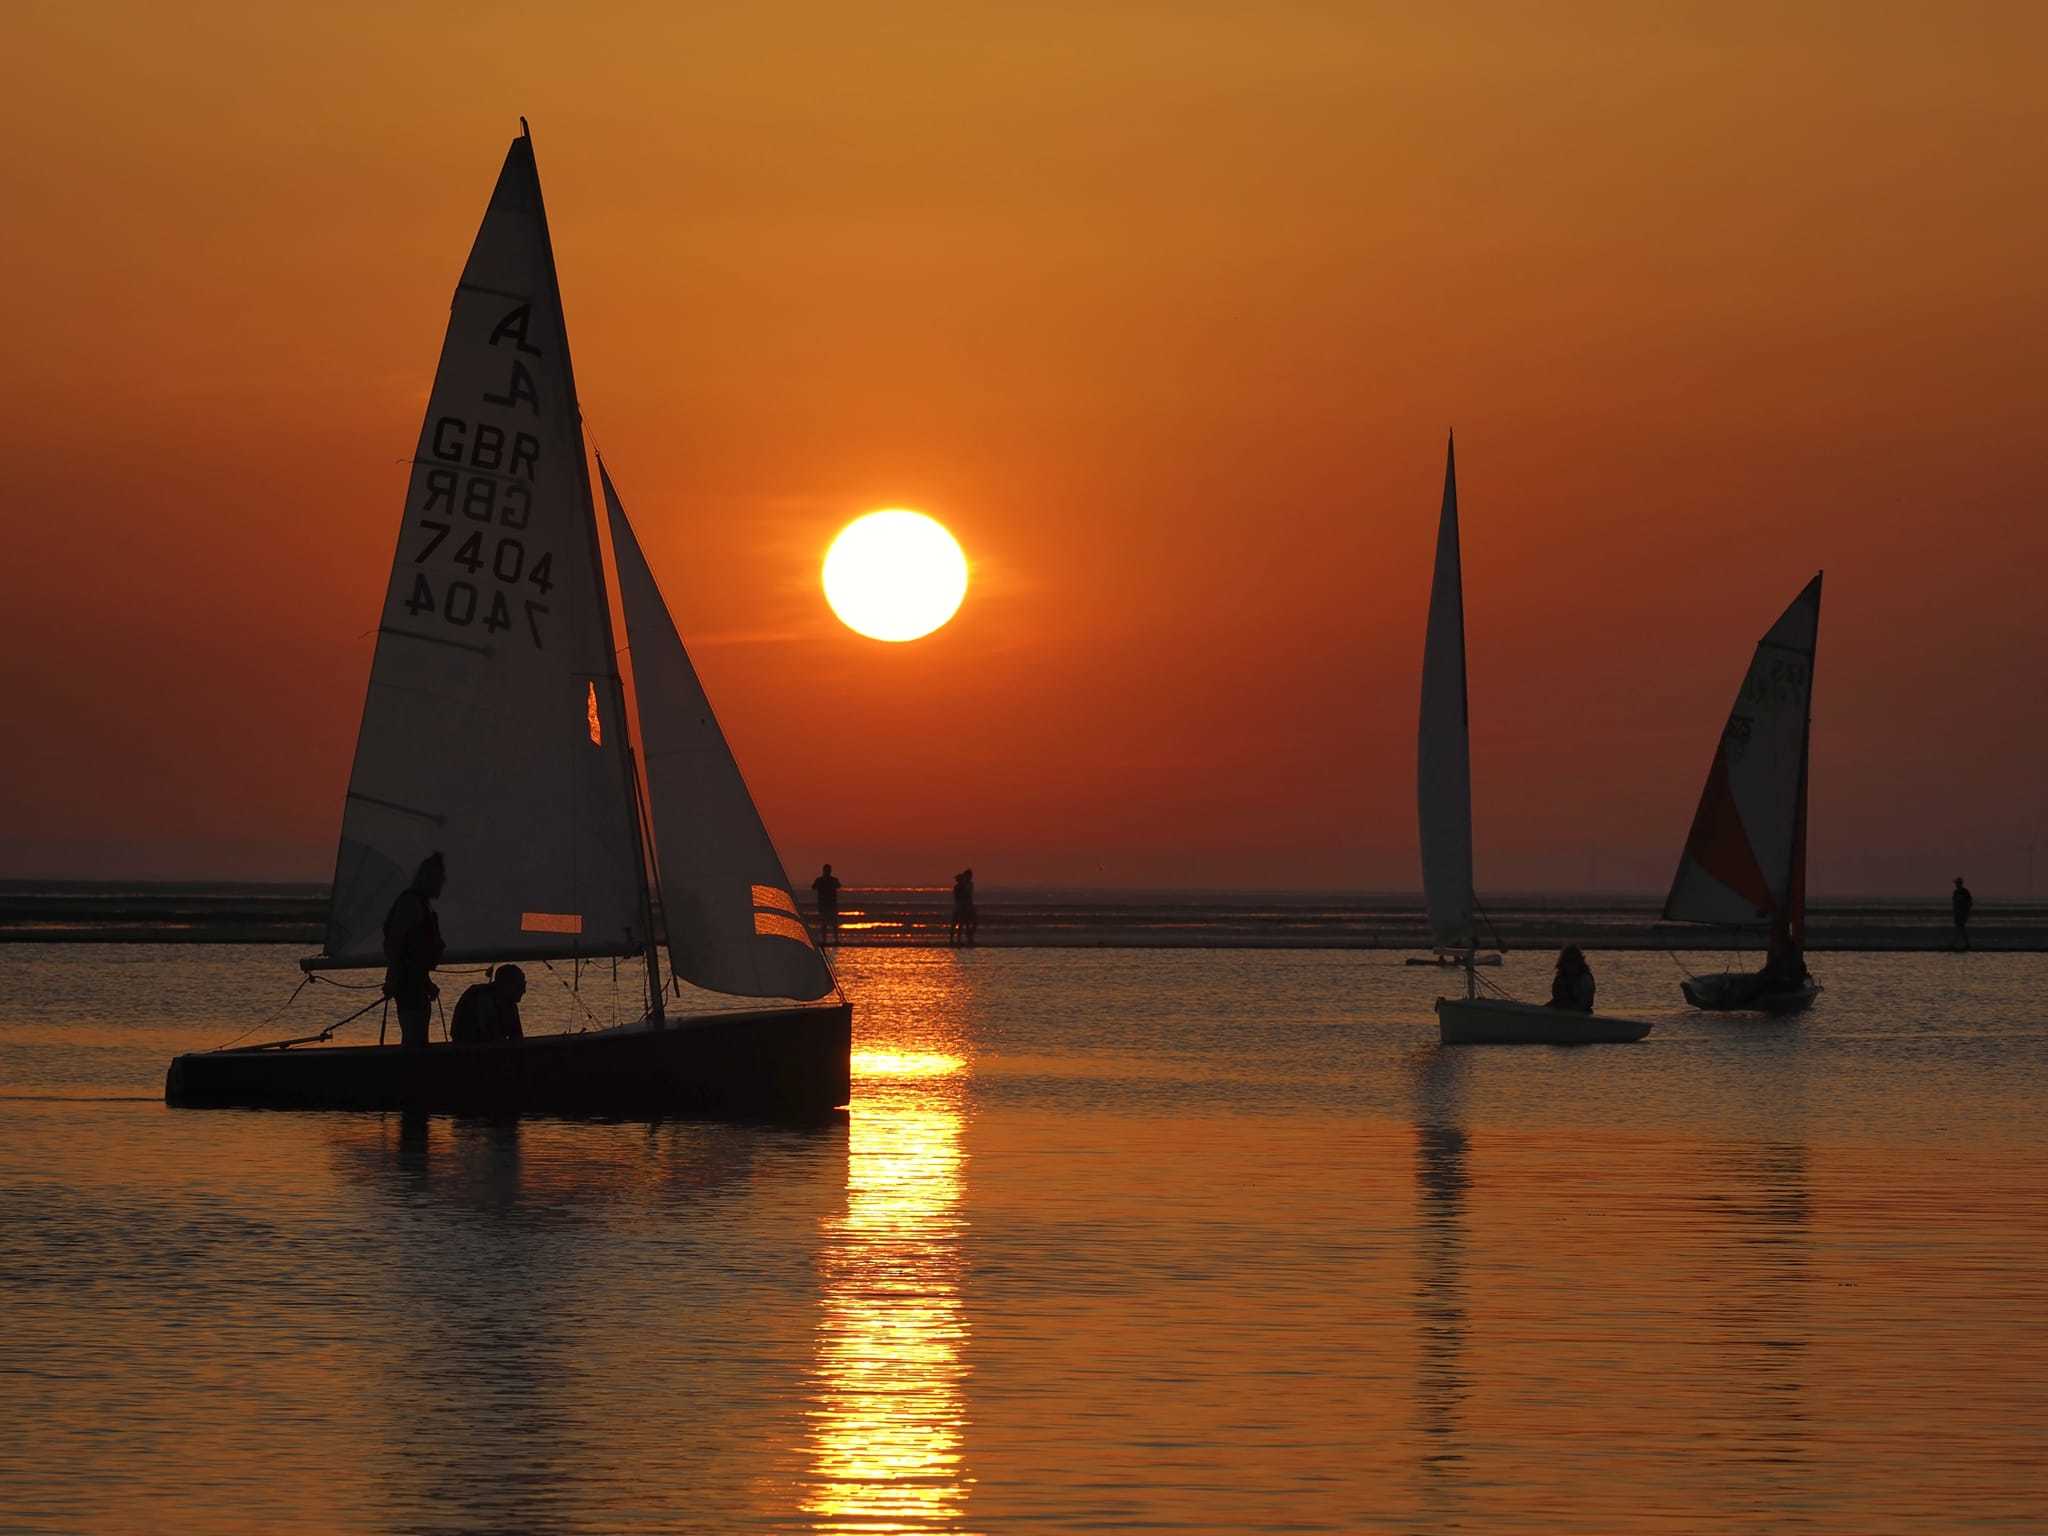 Sunset on the water in West Kirby by Paul Anson